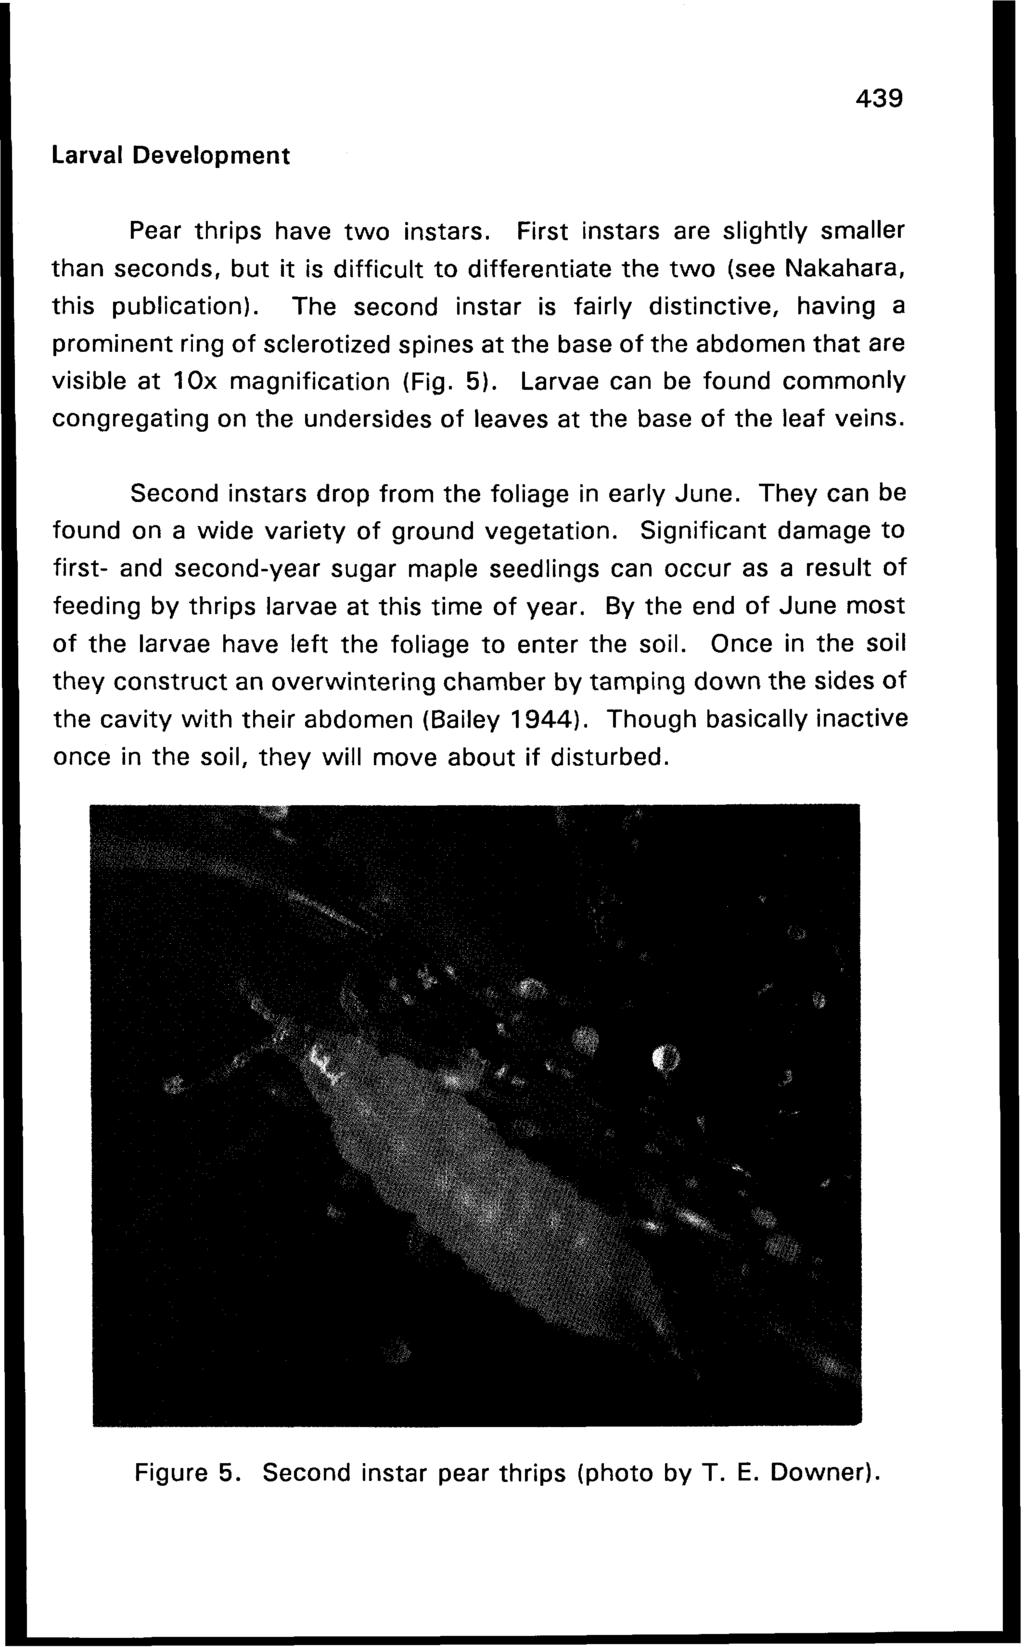 Larval Development Pear thrips have two instars. First instars are slightly smaller than seconds, but it is difficult to differentiate the two (see Nakahara, this publication).